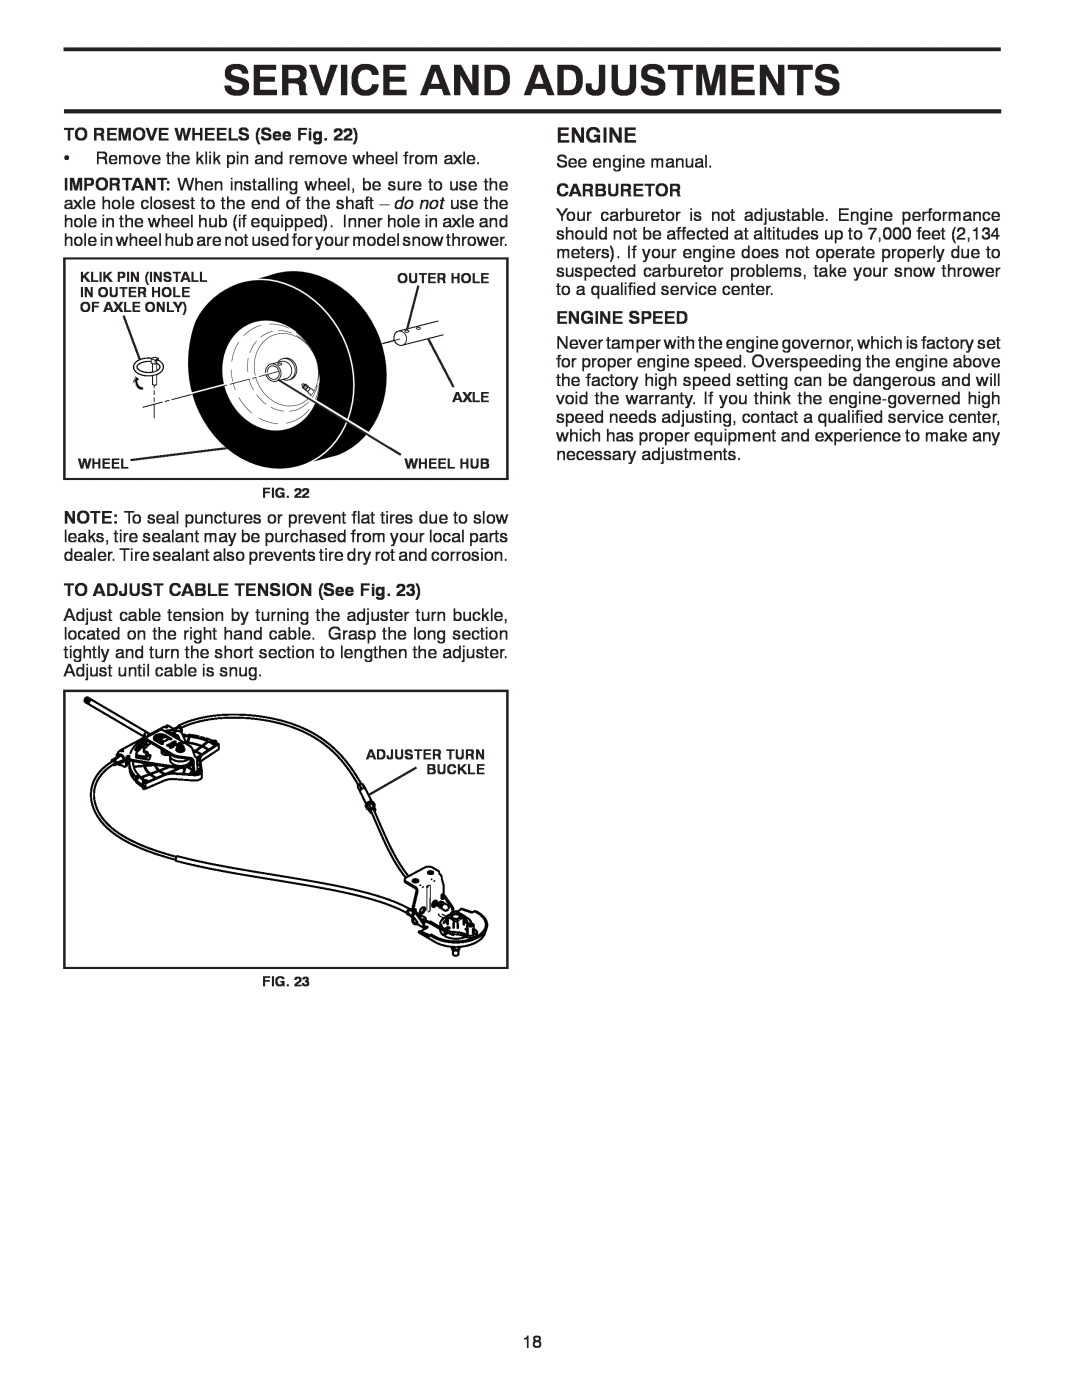 Poulan 428861 Service And Adjustments, Engine, TO REMOVE WHEELS See Fig, TO ADJUST CABLE TENSION See Fig, Carburetor 